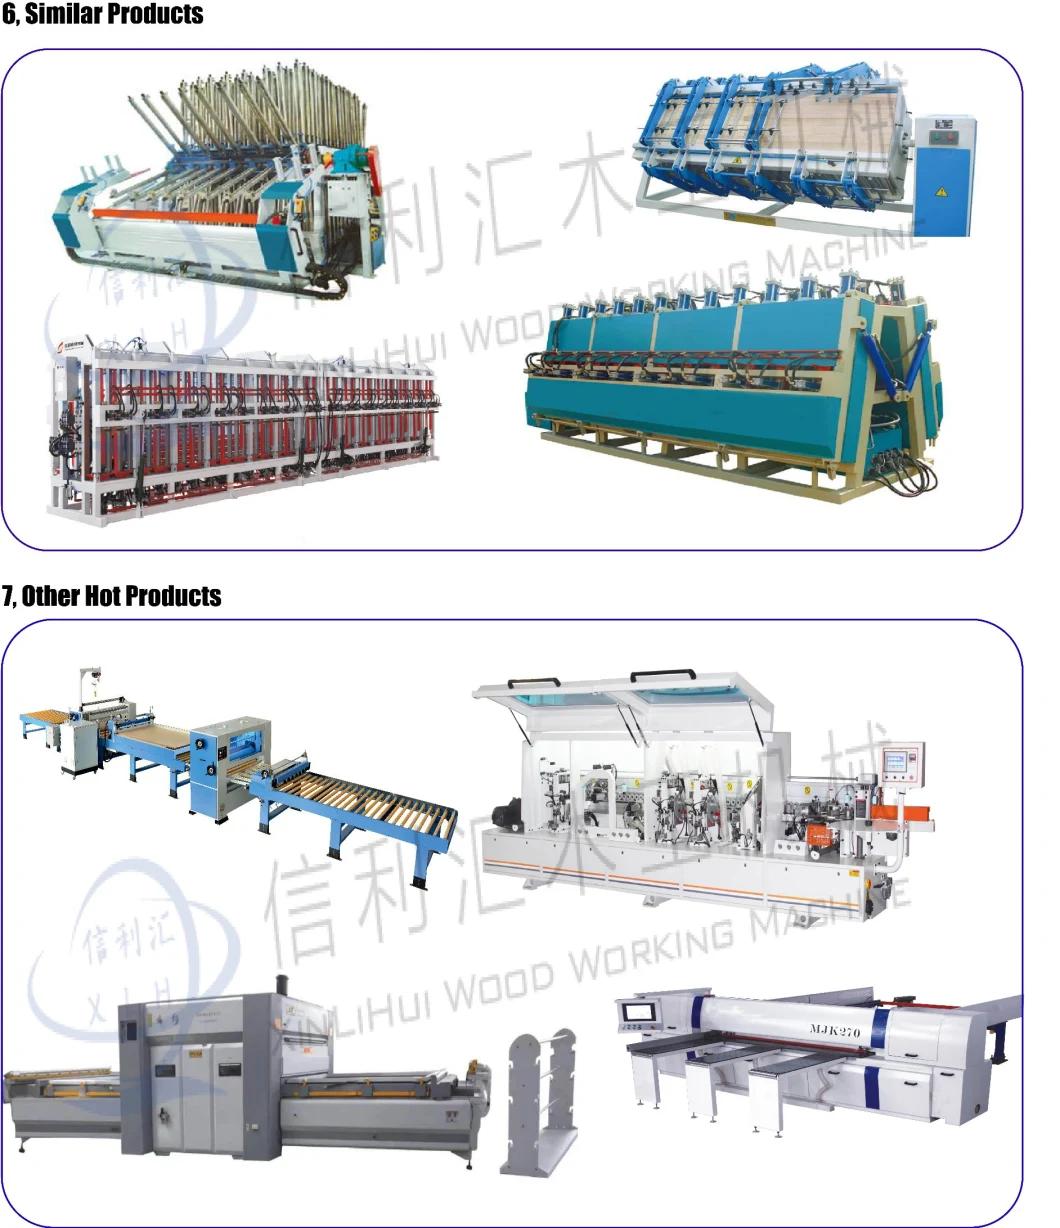 High Frequency Press Machine, Cabinet Clamping Machine, Cabinet Case Clamping, Cabinet Box Clamping, High Frequency Wood Joining Machine